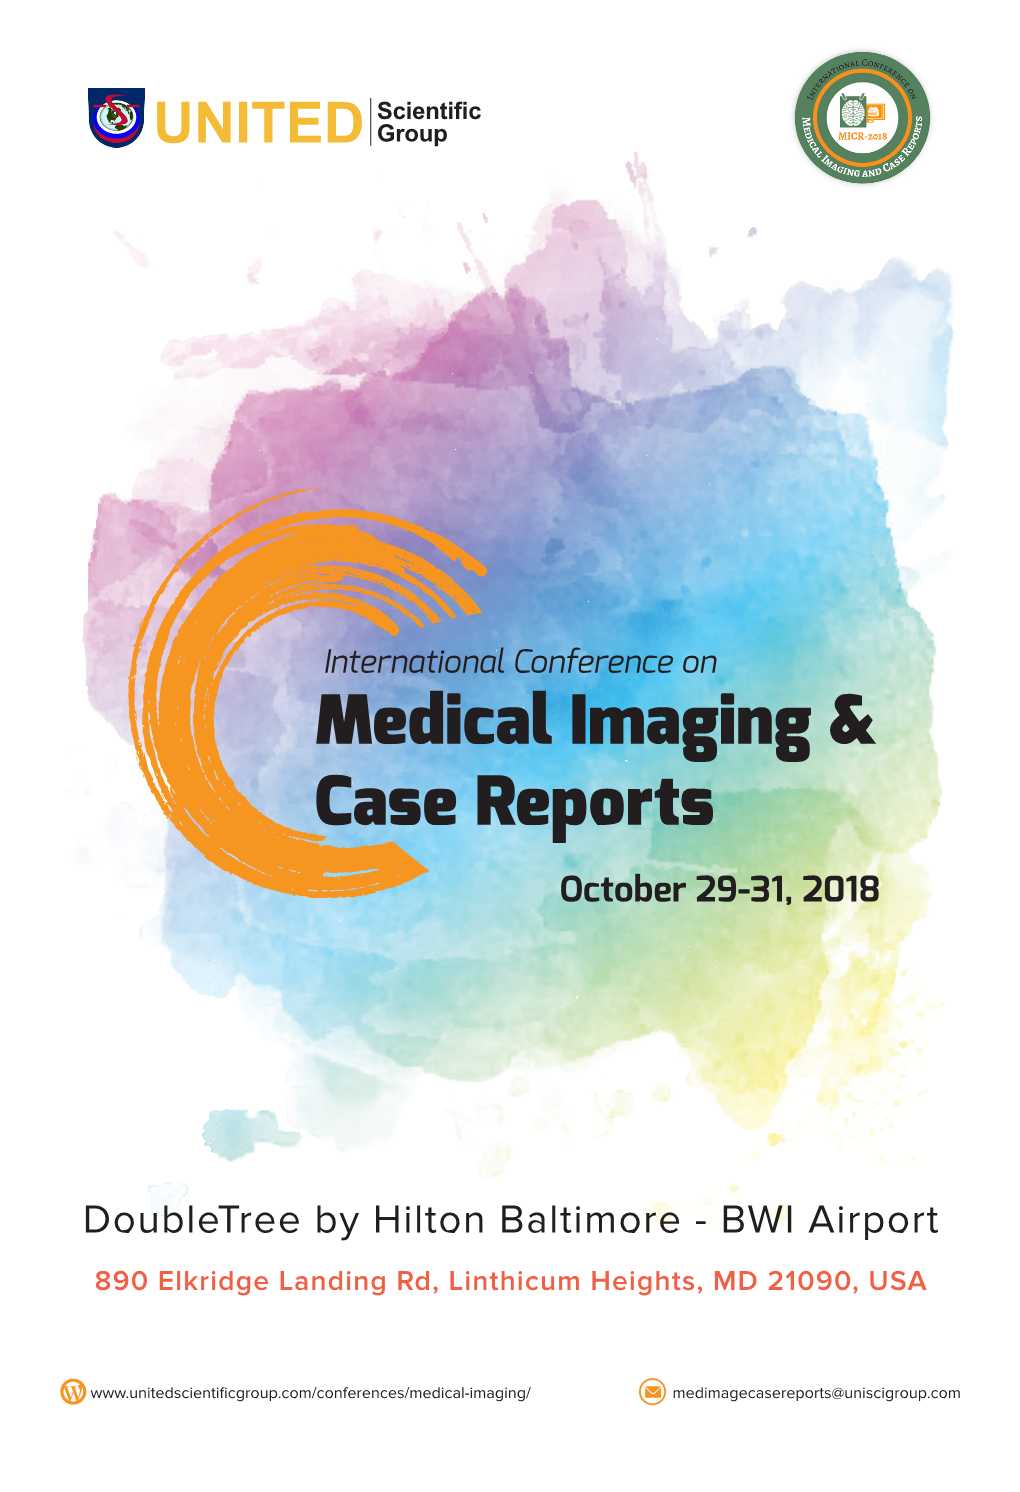 Medical Imaging & Case Reports